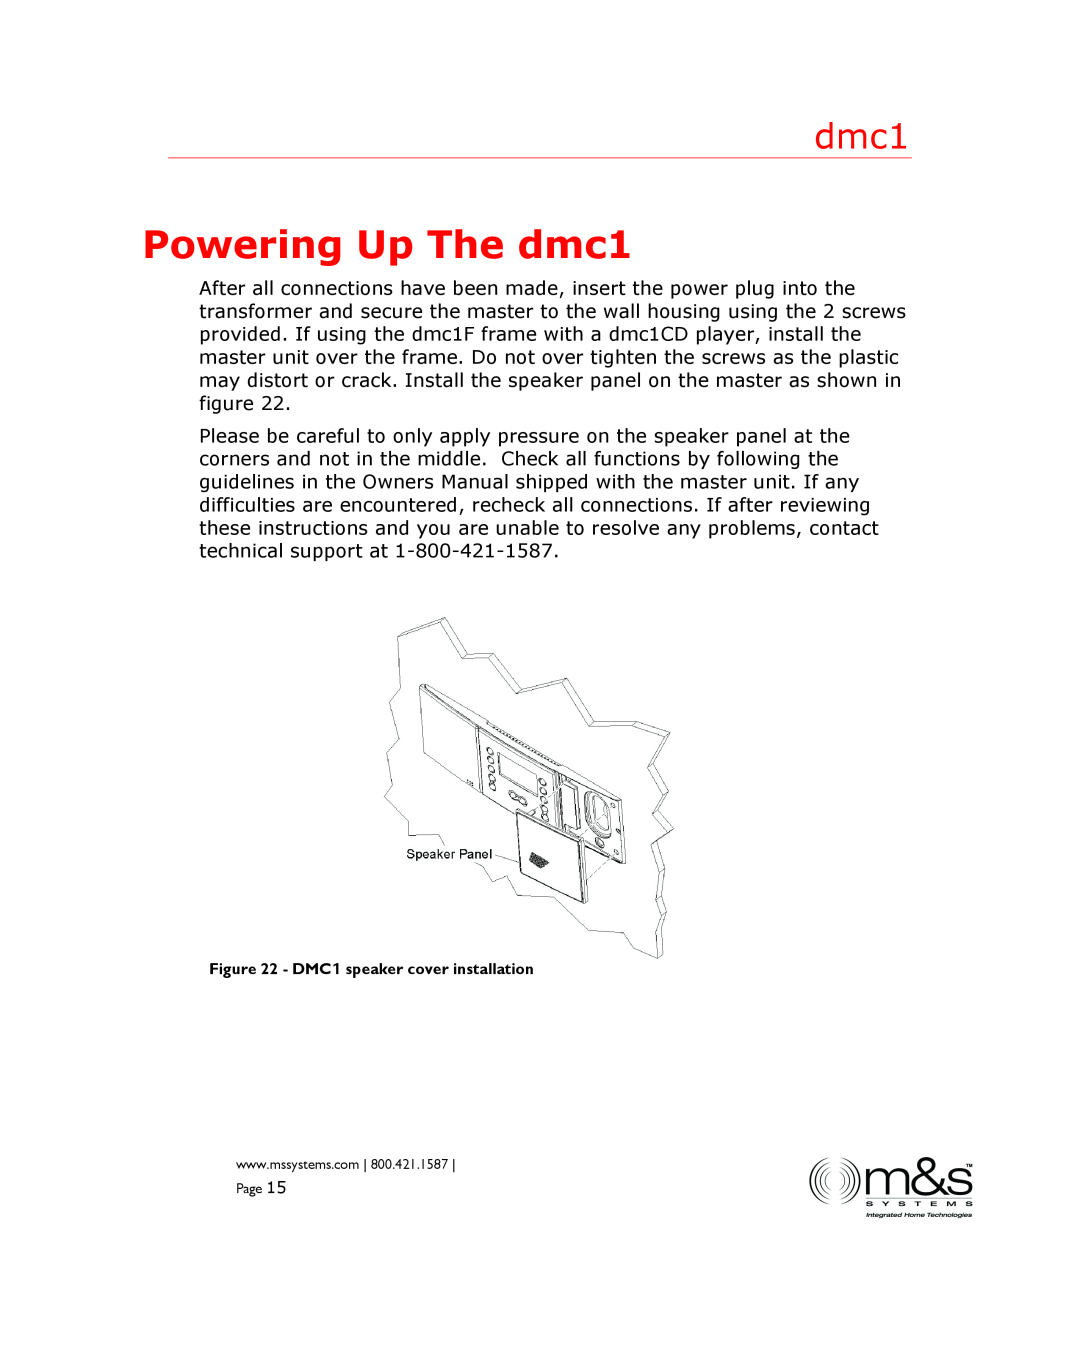 M&S Systems manual Powering Up The dmc1, DMC1 speaker cover installation 